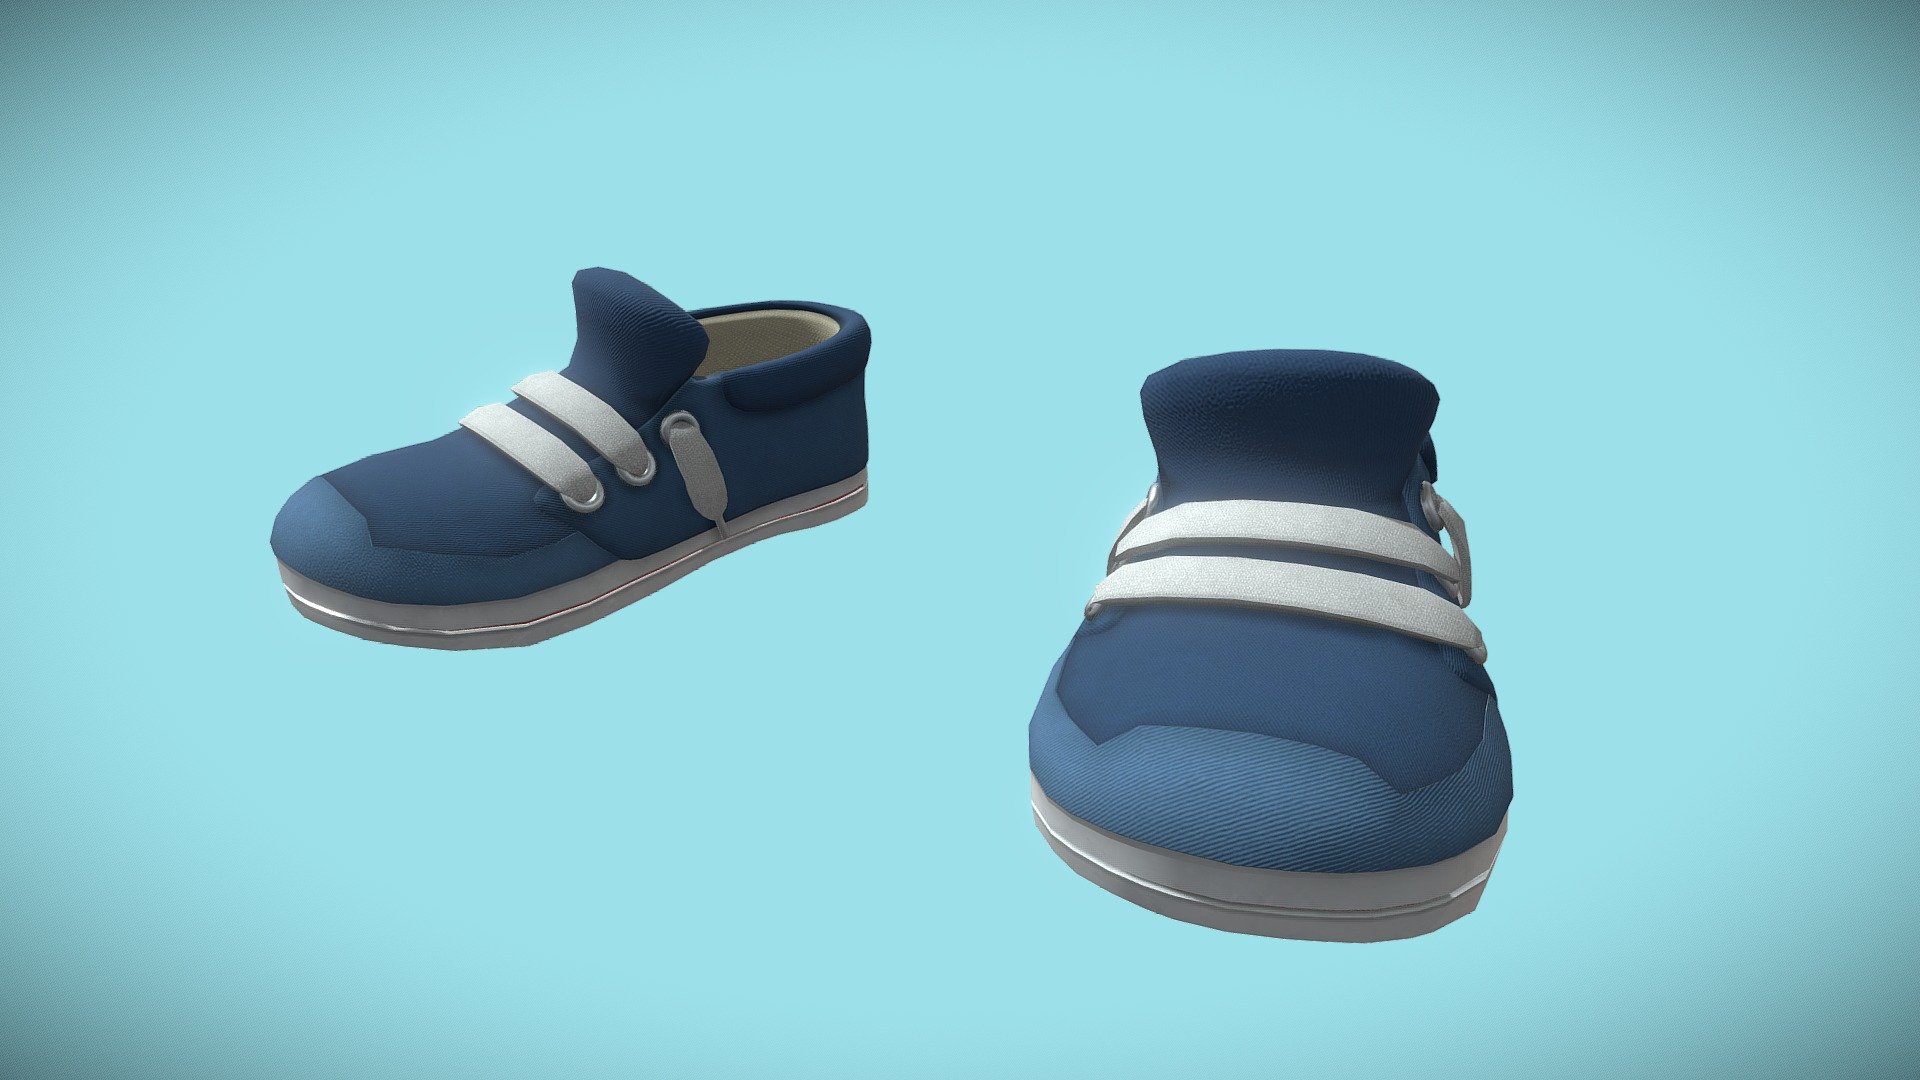 Cartoon Sneaker Low Poly.
2048x2048 PBR textures. (Base Color, Normal Map, Roughness &amp; Metalness).
Easy Color customizable.
Clean topology.
UV unwrapped.

Hope you like it 3d model